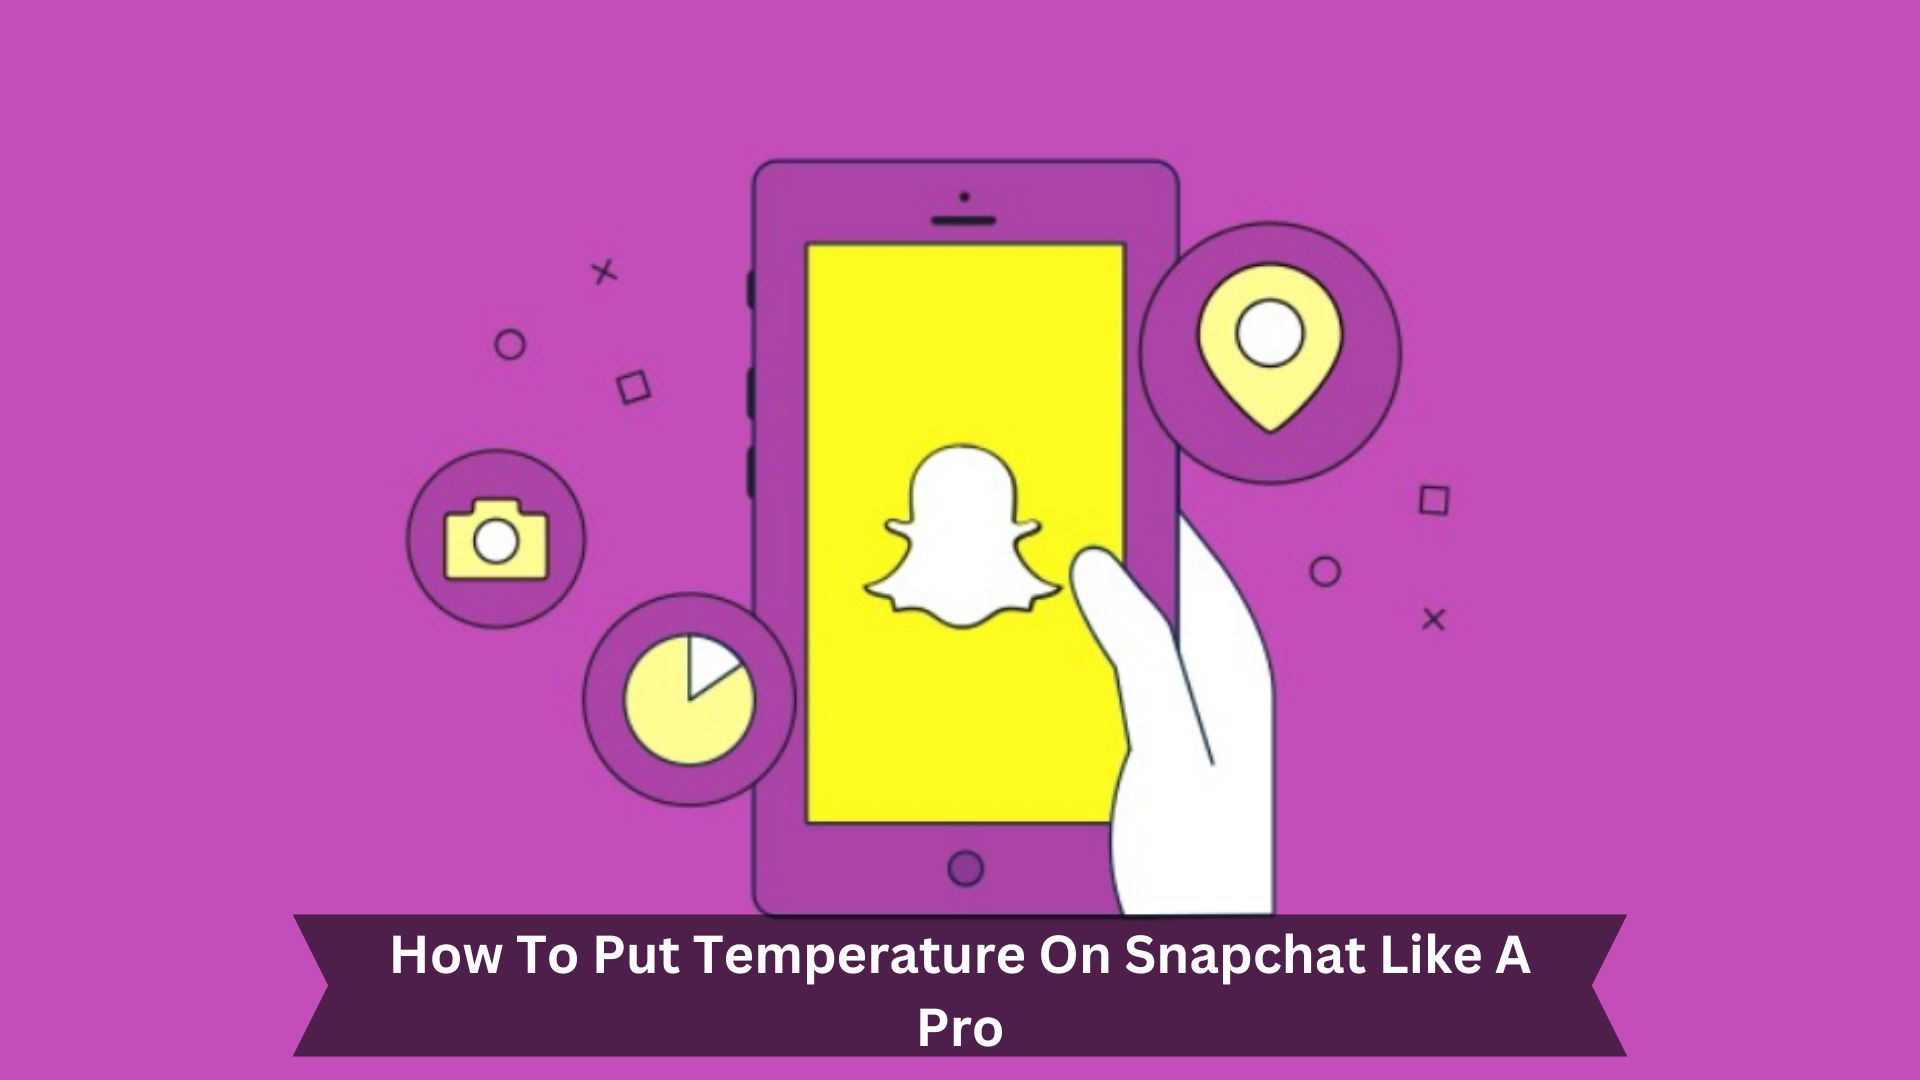 How-To-Put-Temperature-On-Snapchat-Like-A-Pro-1